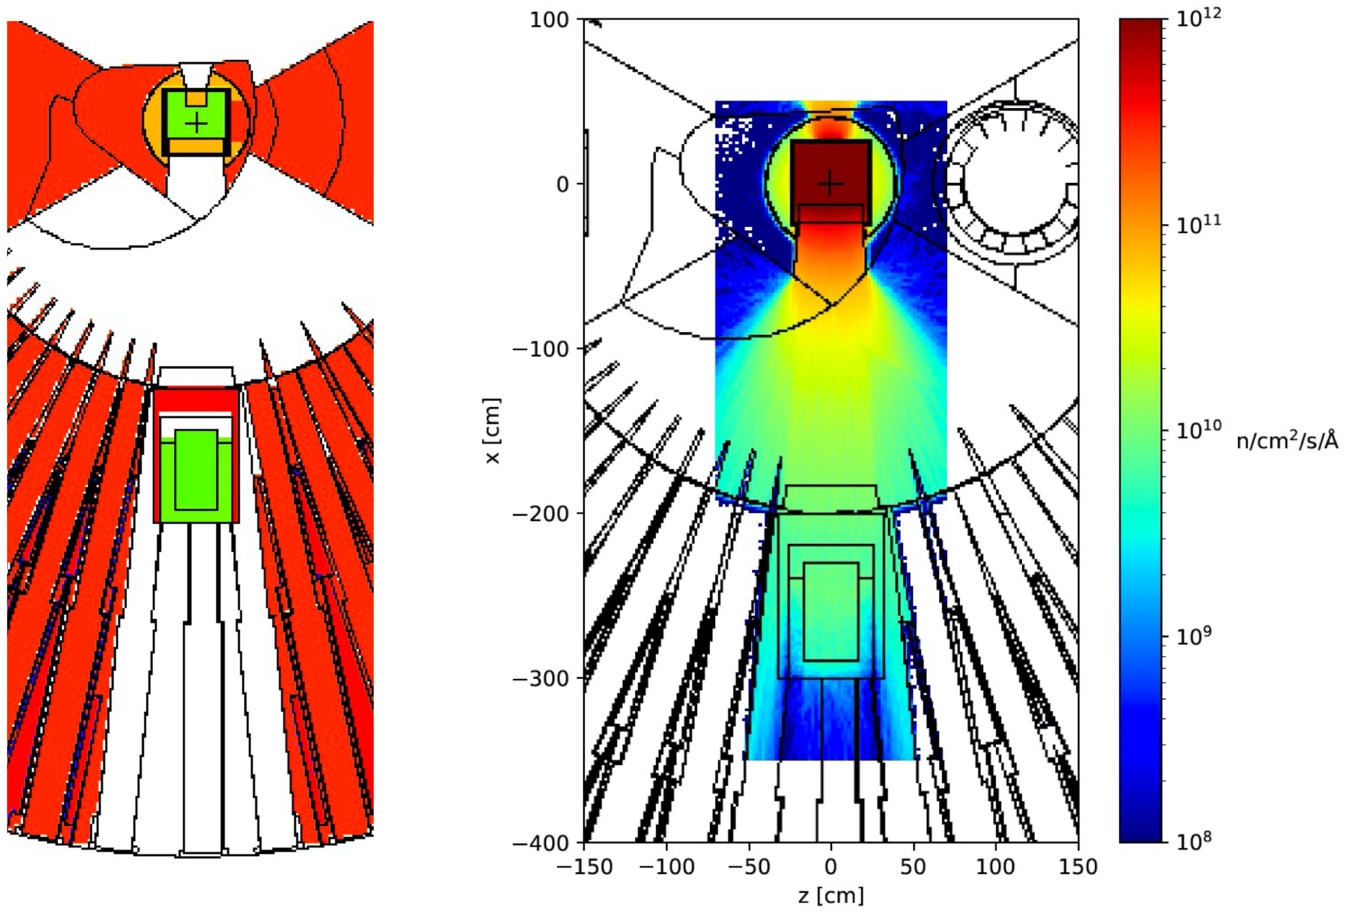 Left: MCNP geometry showing the He-II source backed by a LD2 reflector in the large beamport, concept of Serebrov and Lyamkin. Right: calculated flux map of 8.9 Å neutrons (unperturbed by the UCN source).